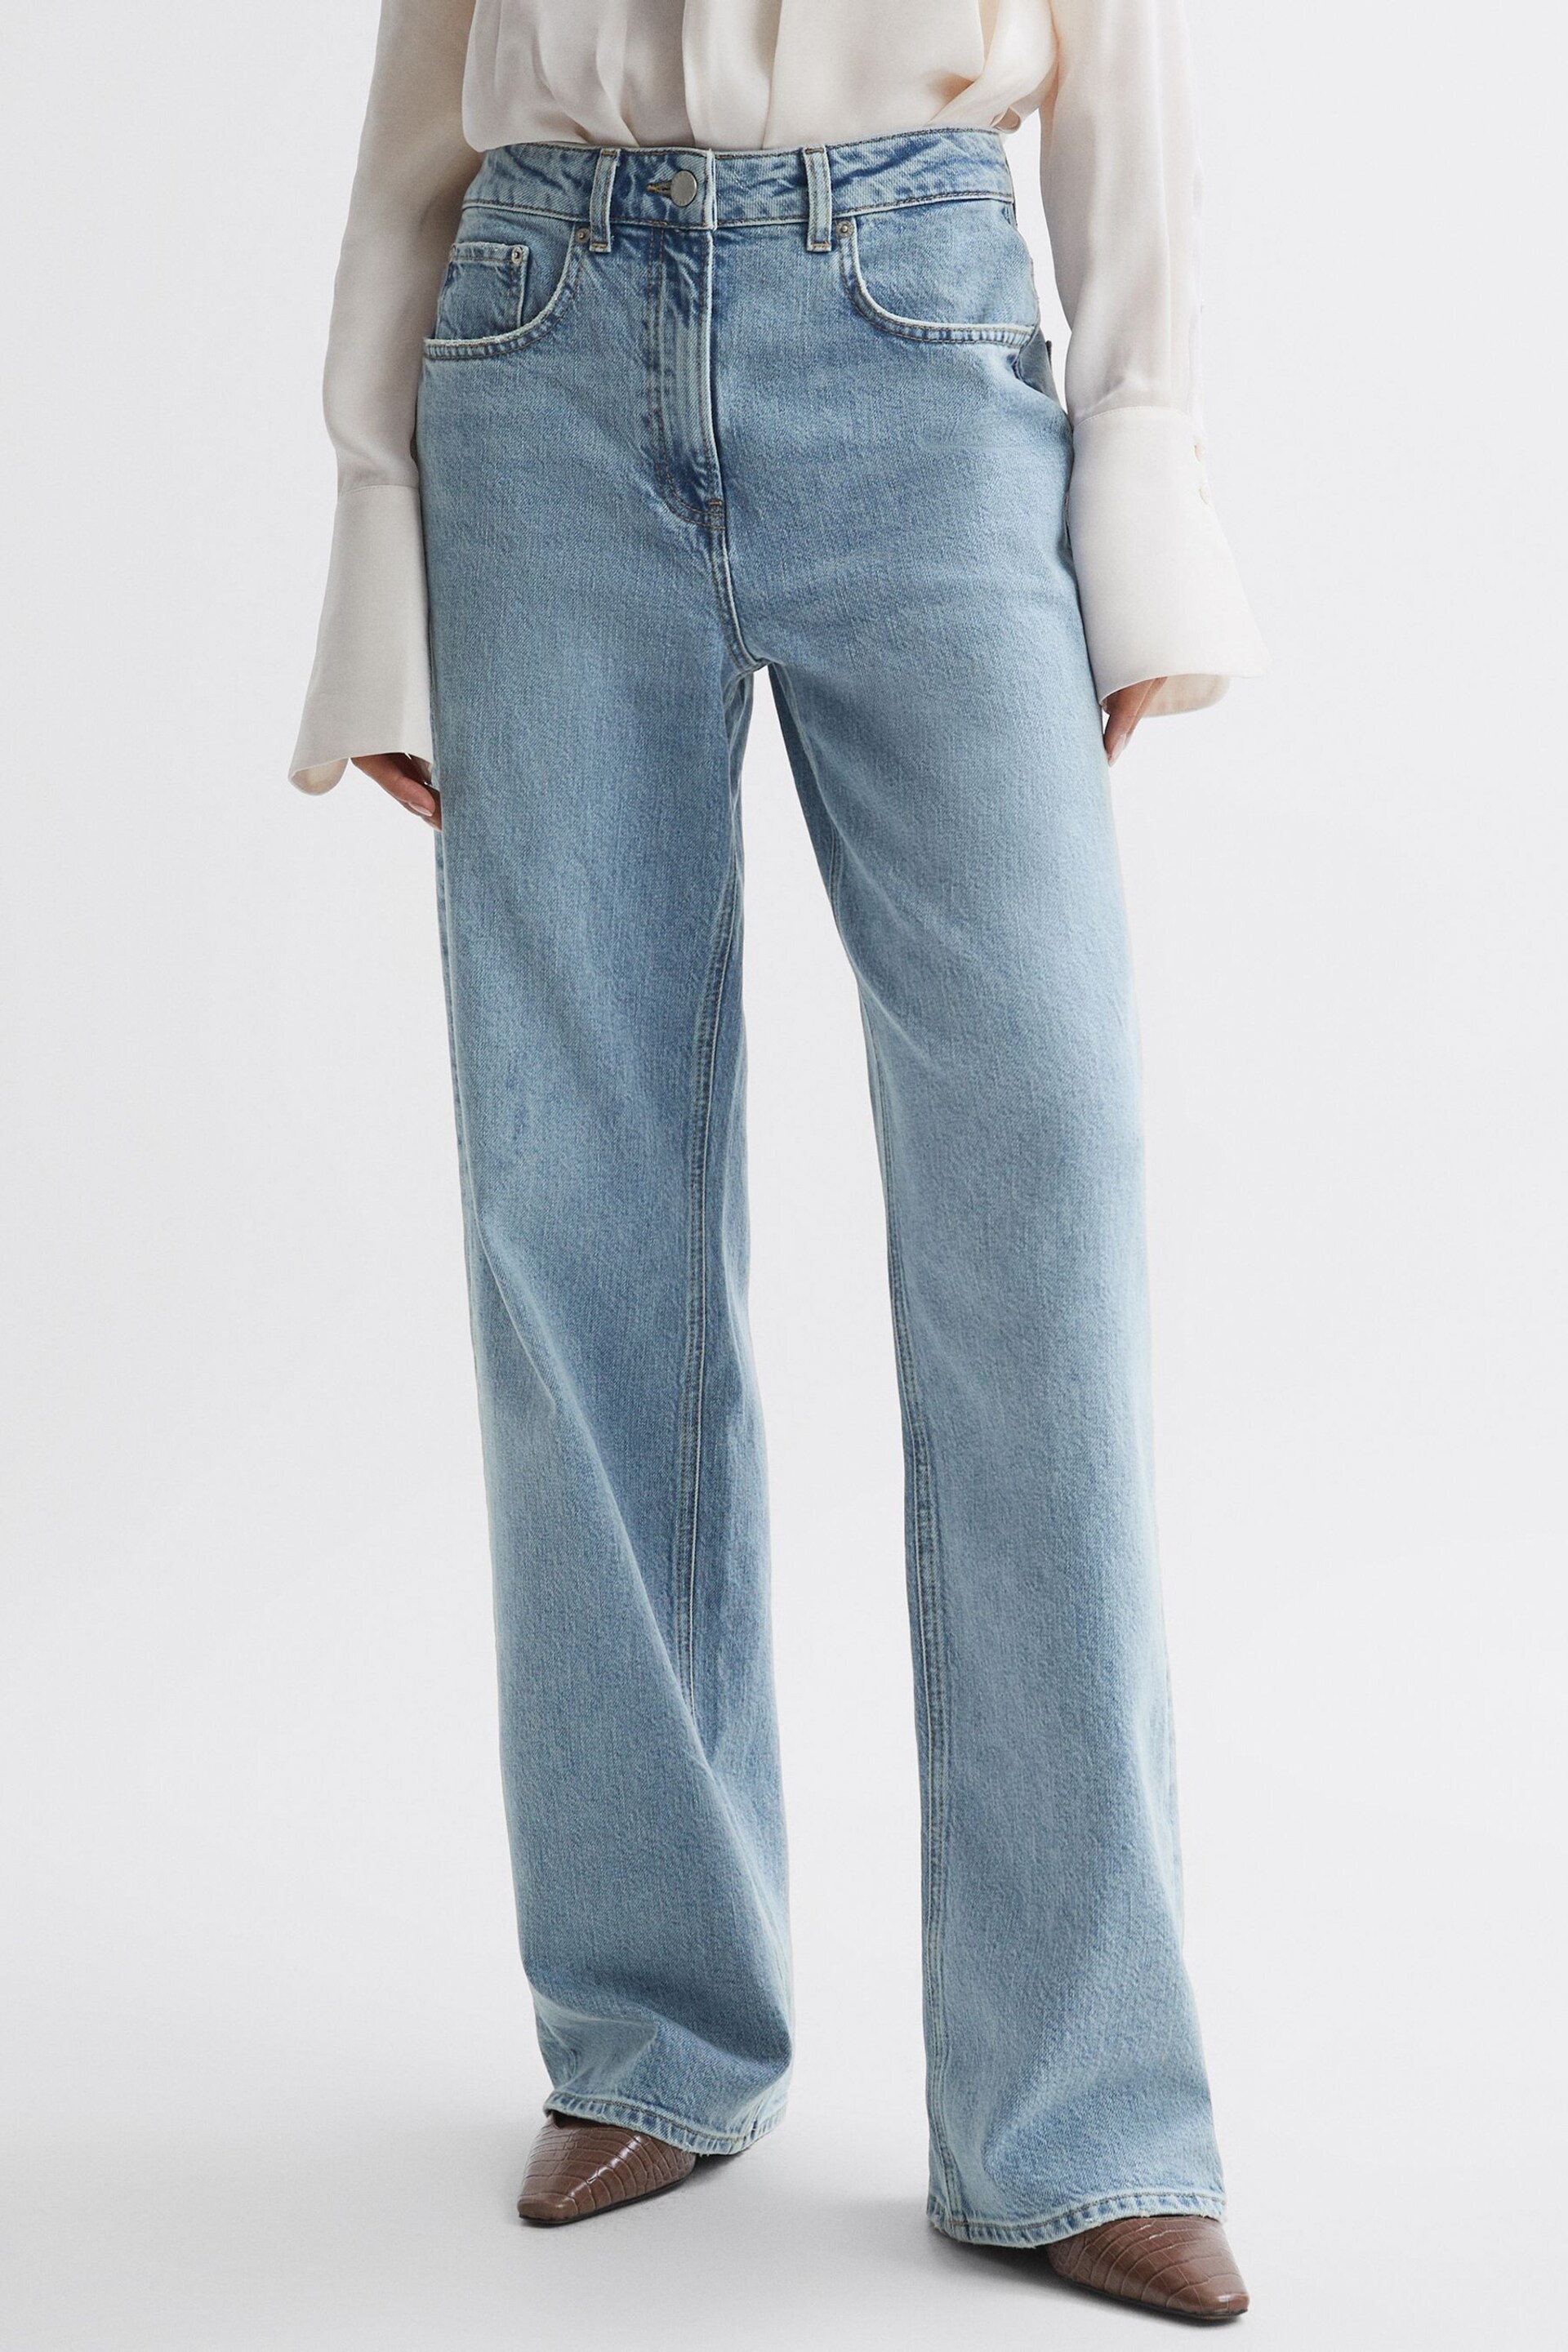 Reiss Light Blue Marion Mid Rise Wide Leg Jeans - Image 3 of 5